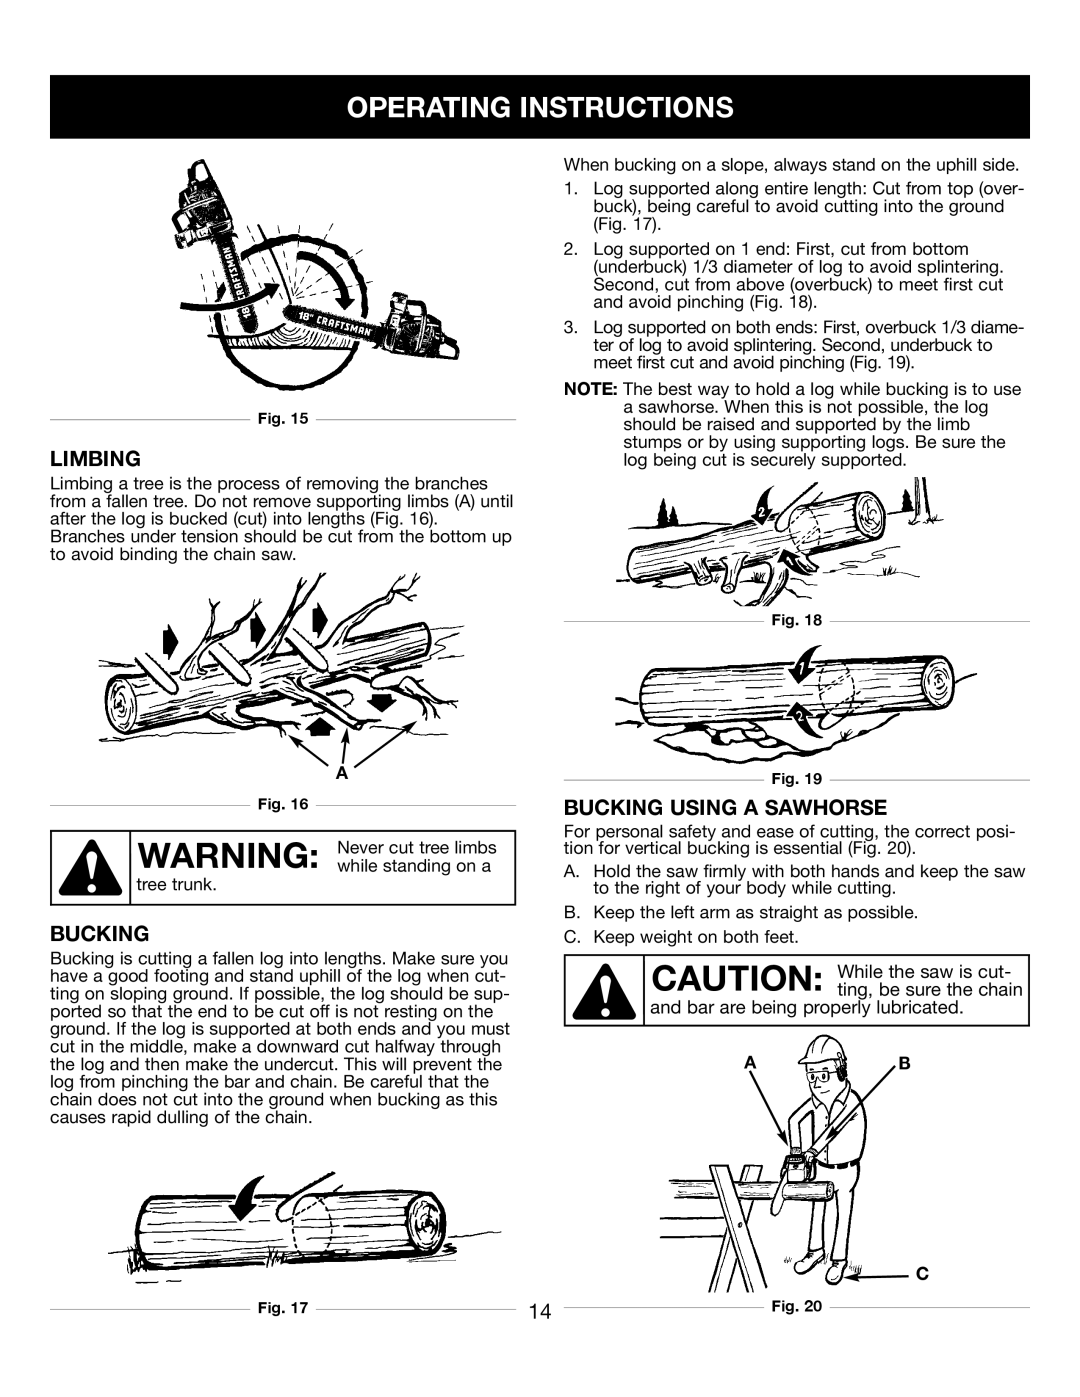 Craftsman 316350840 Operating Instructions, Limbing, Bucking Using A Sawhorse, and bar are being properly lubricated 